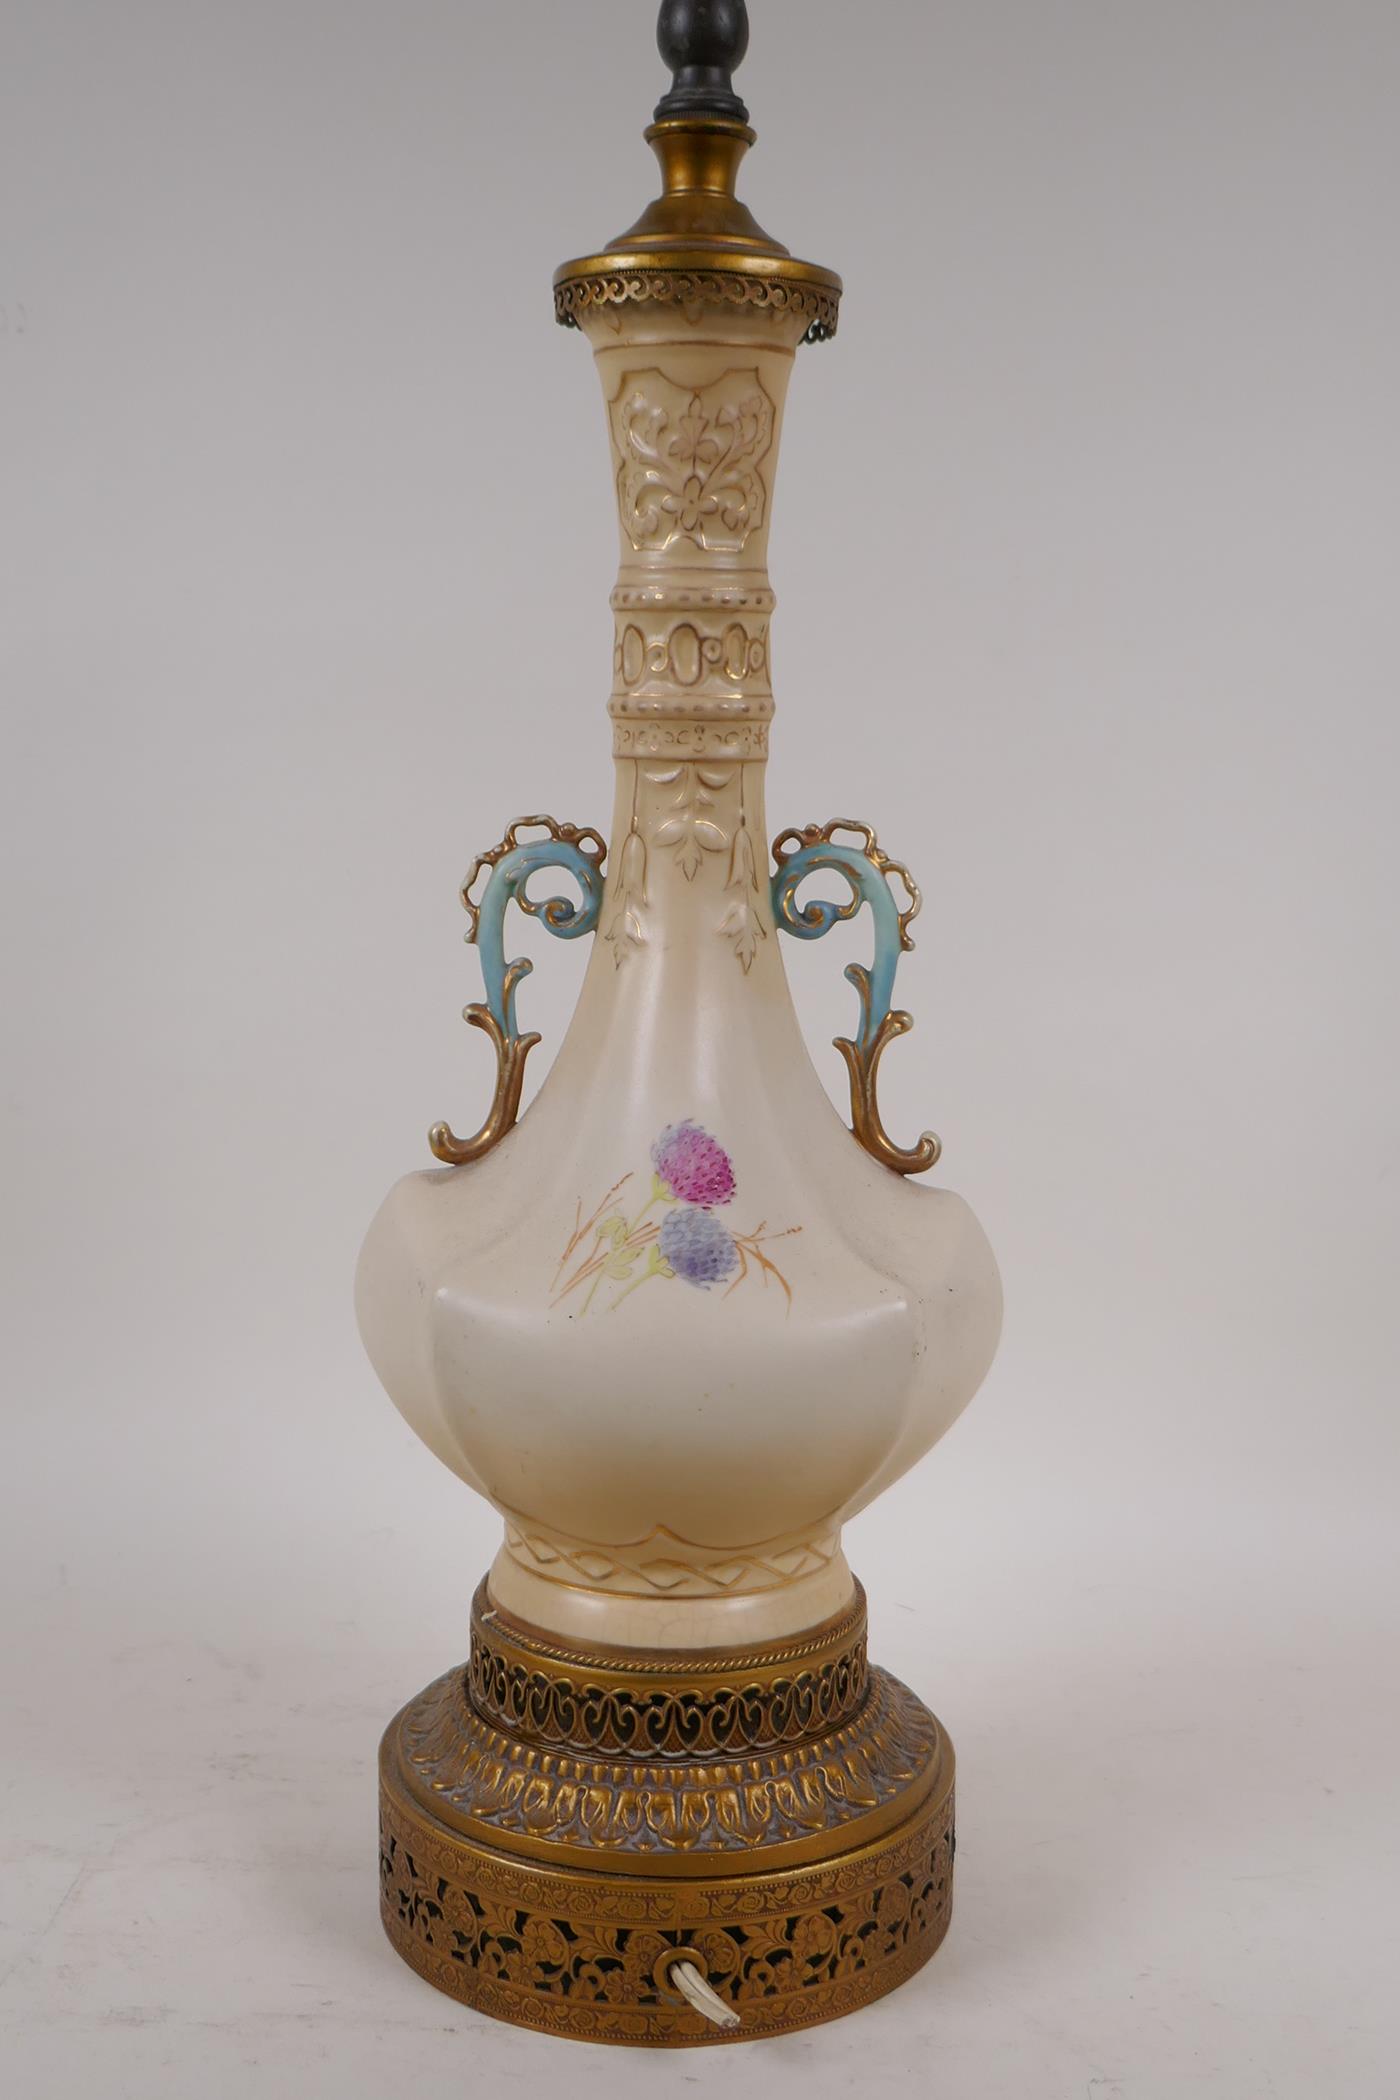 A C19th Worcester style two handled vase, converted to a lamp, with pierced brass base and mounts, - Image 4 of 5